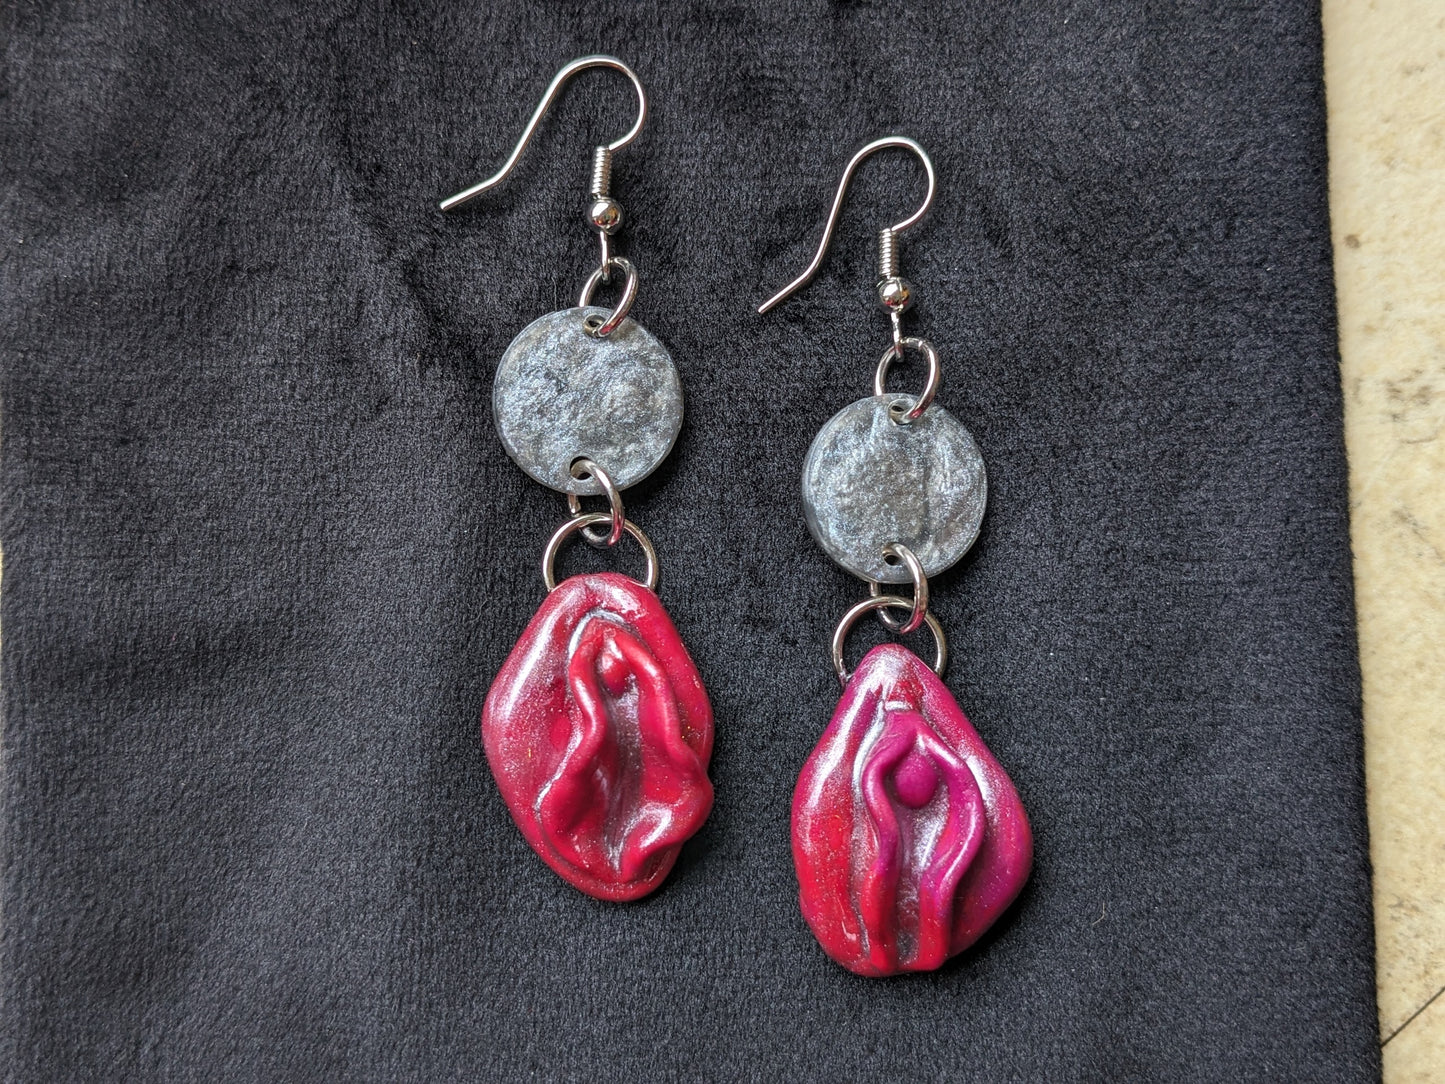 Red & Silver Vulva Earrings - Luscious Lips Collection by Melinda Love